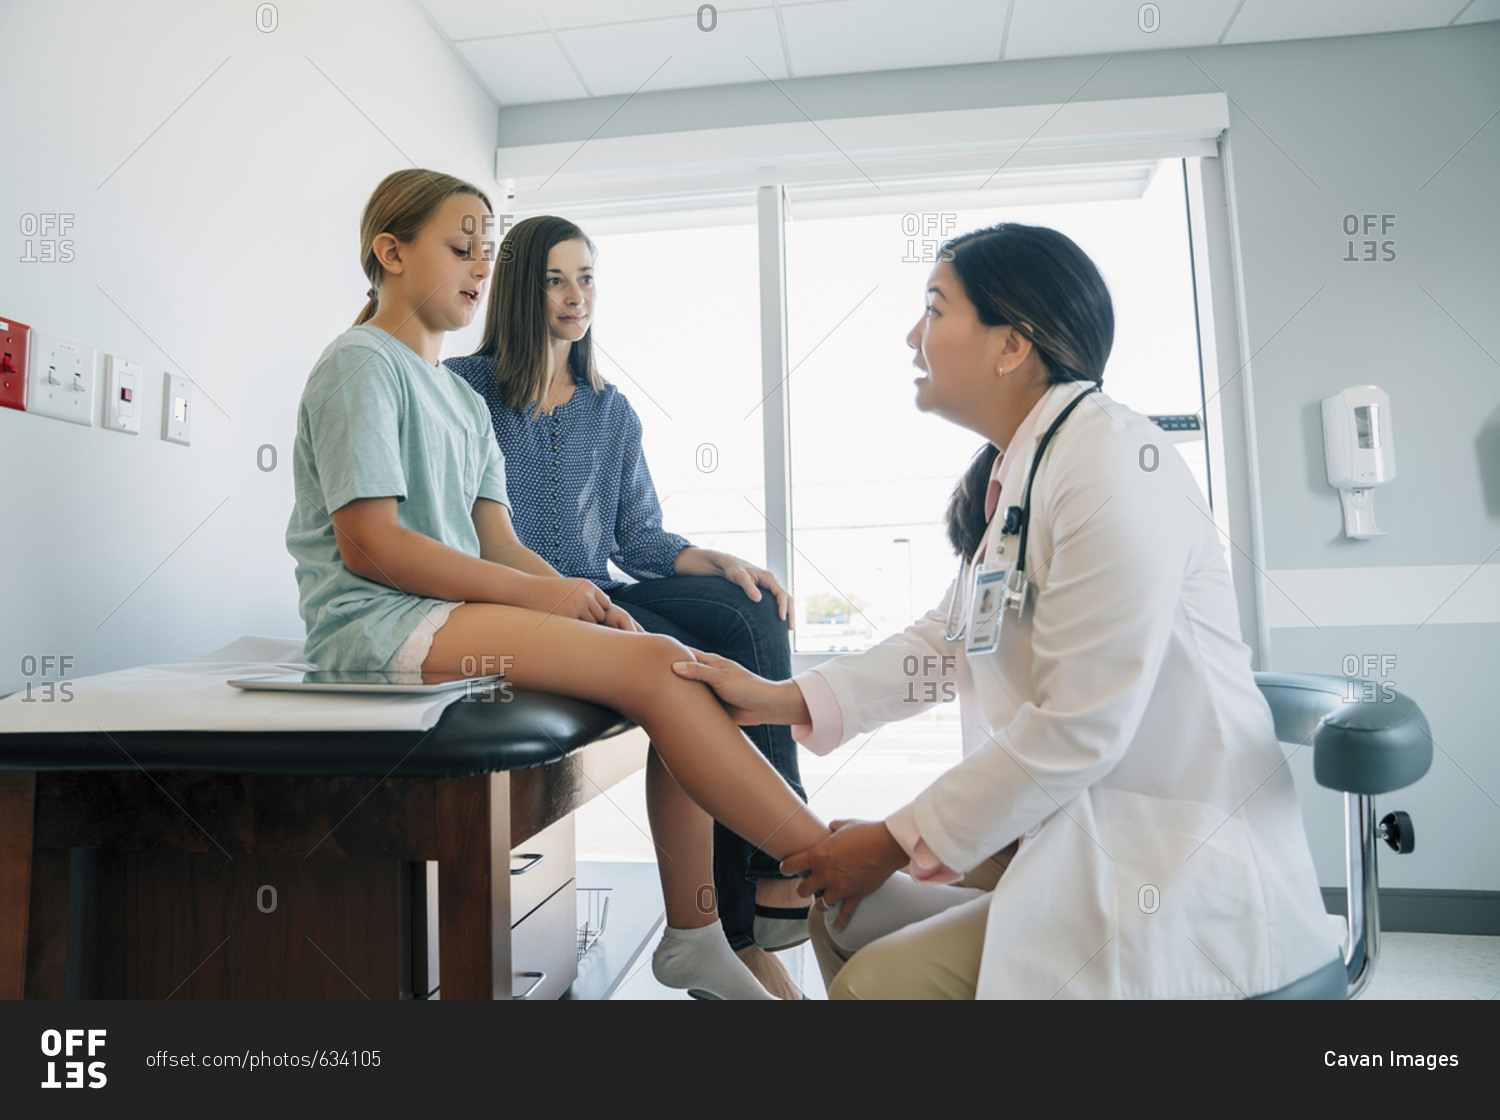 Mother looking at pediatrician checking daughter's knee joint in medical examination room